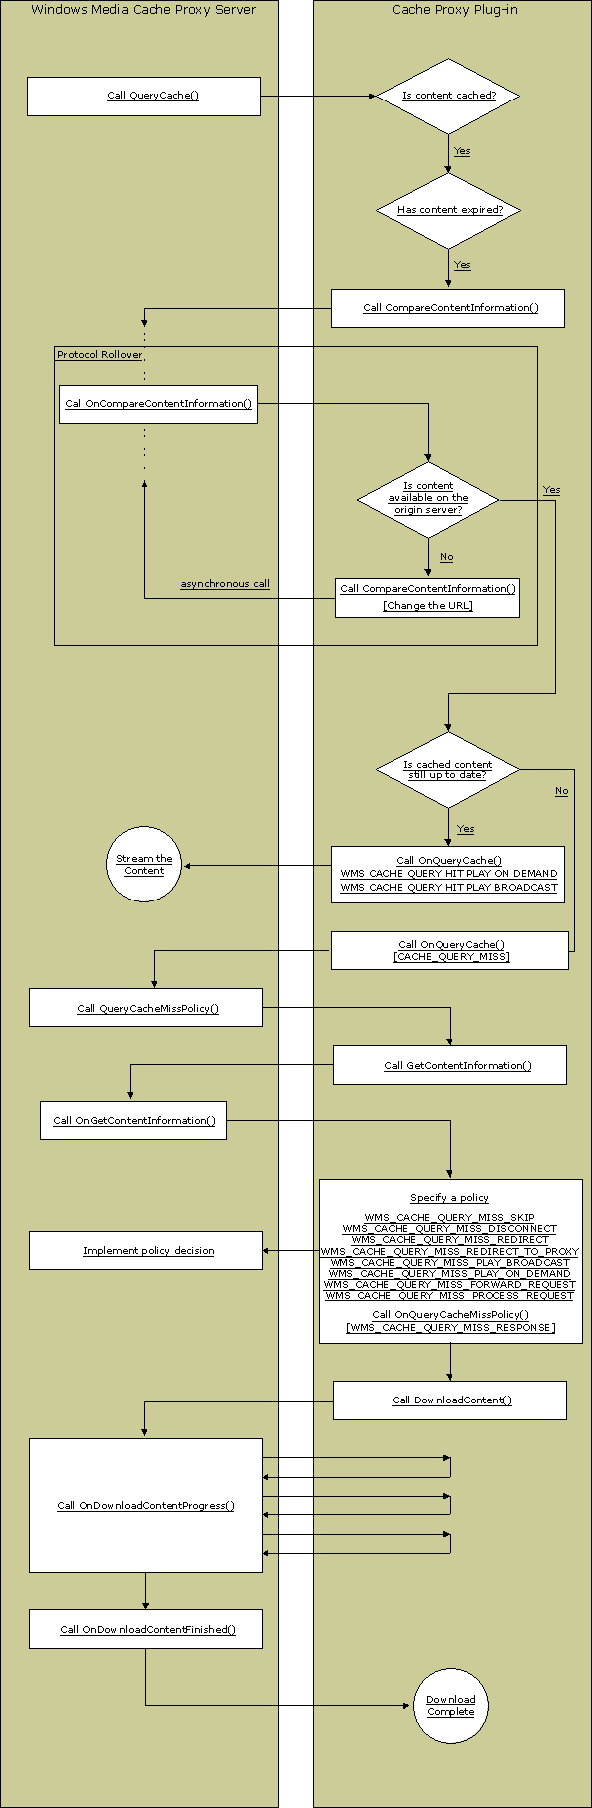 Illustration of cache proxy implementation for expired content. 